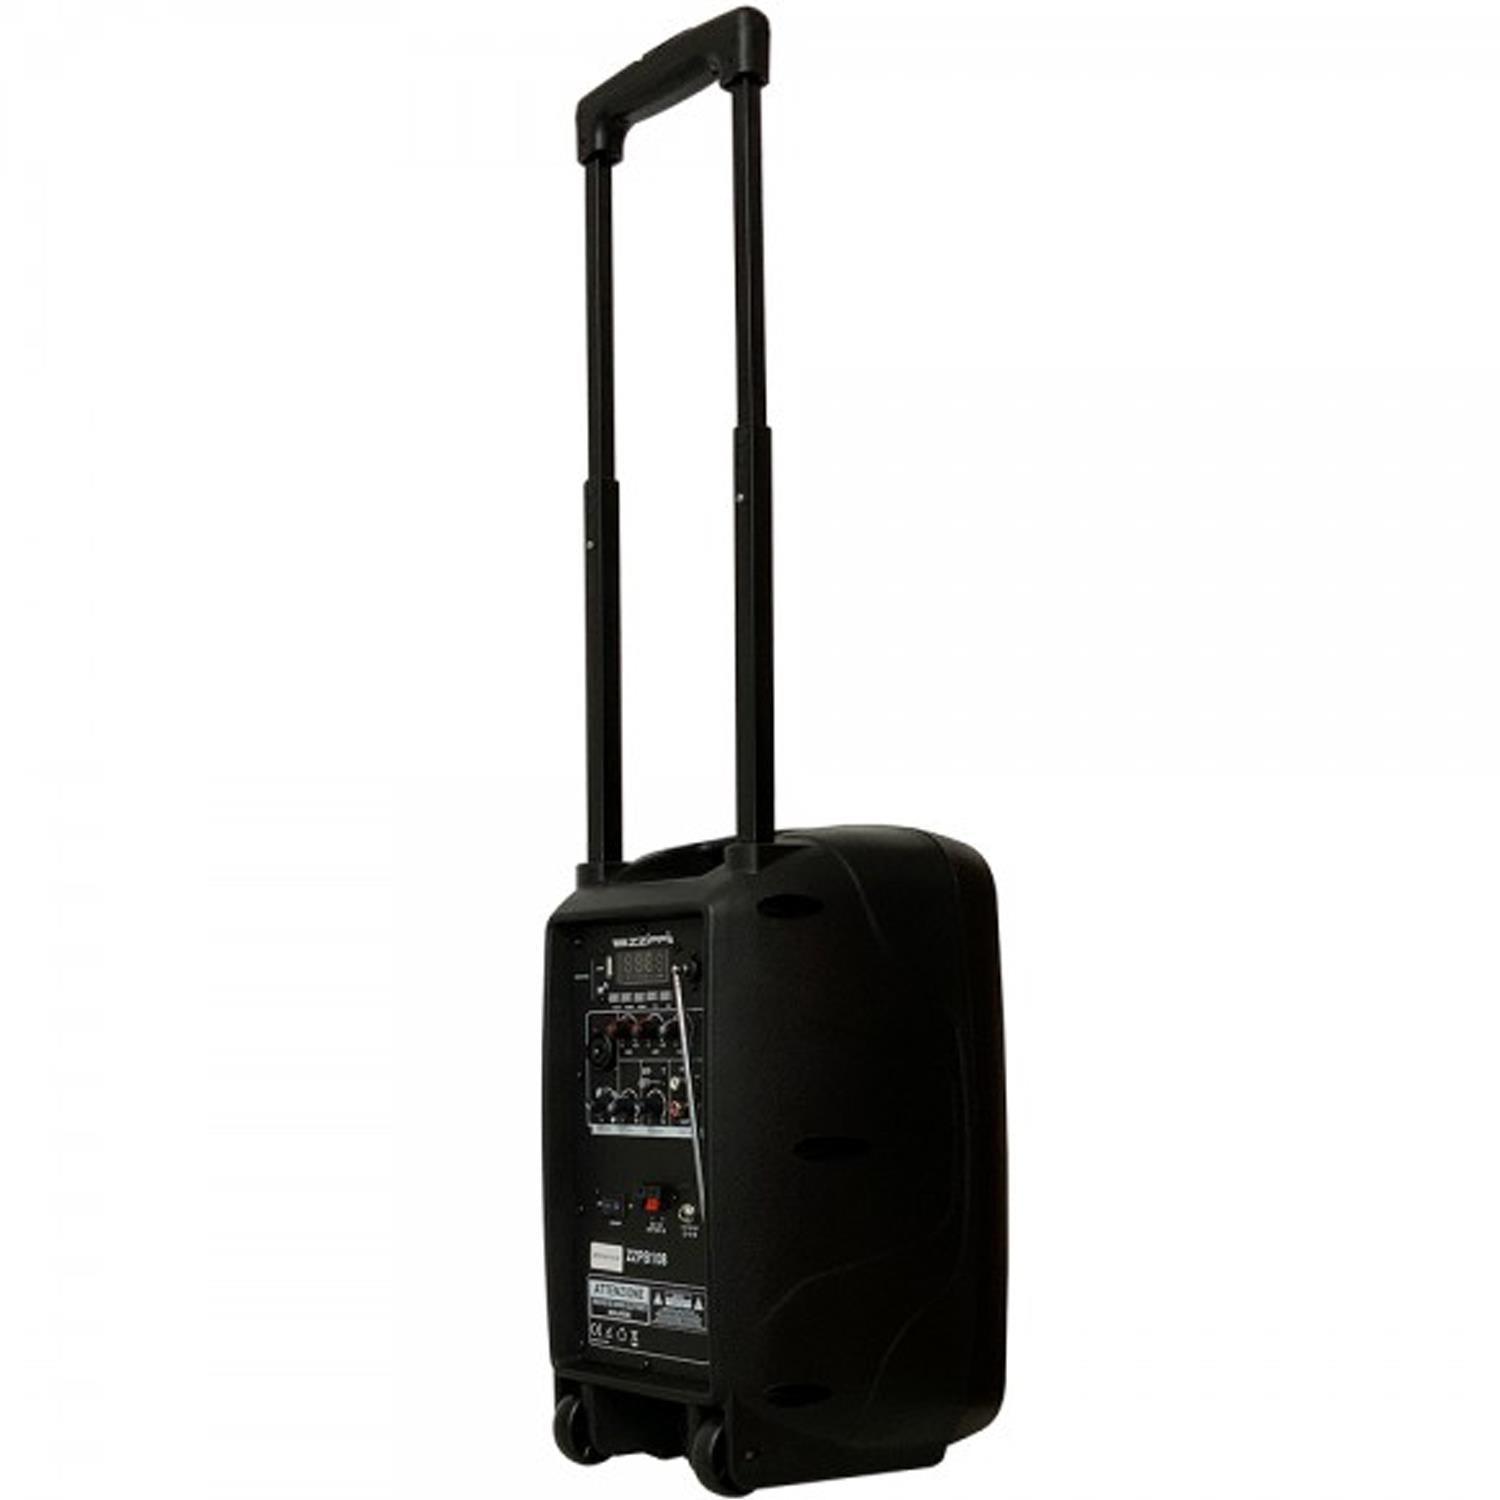 ZZiPP ZZPB108 8" Battery Powered Portable PA System with Mic - DY Pro Audio